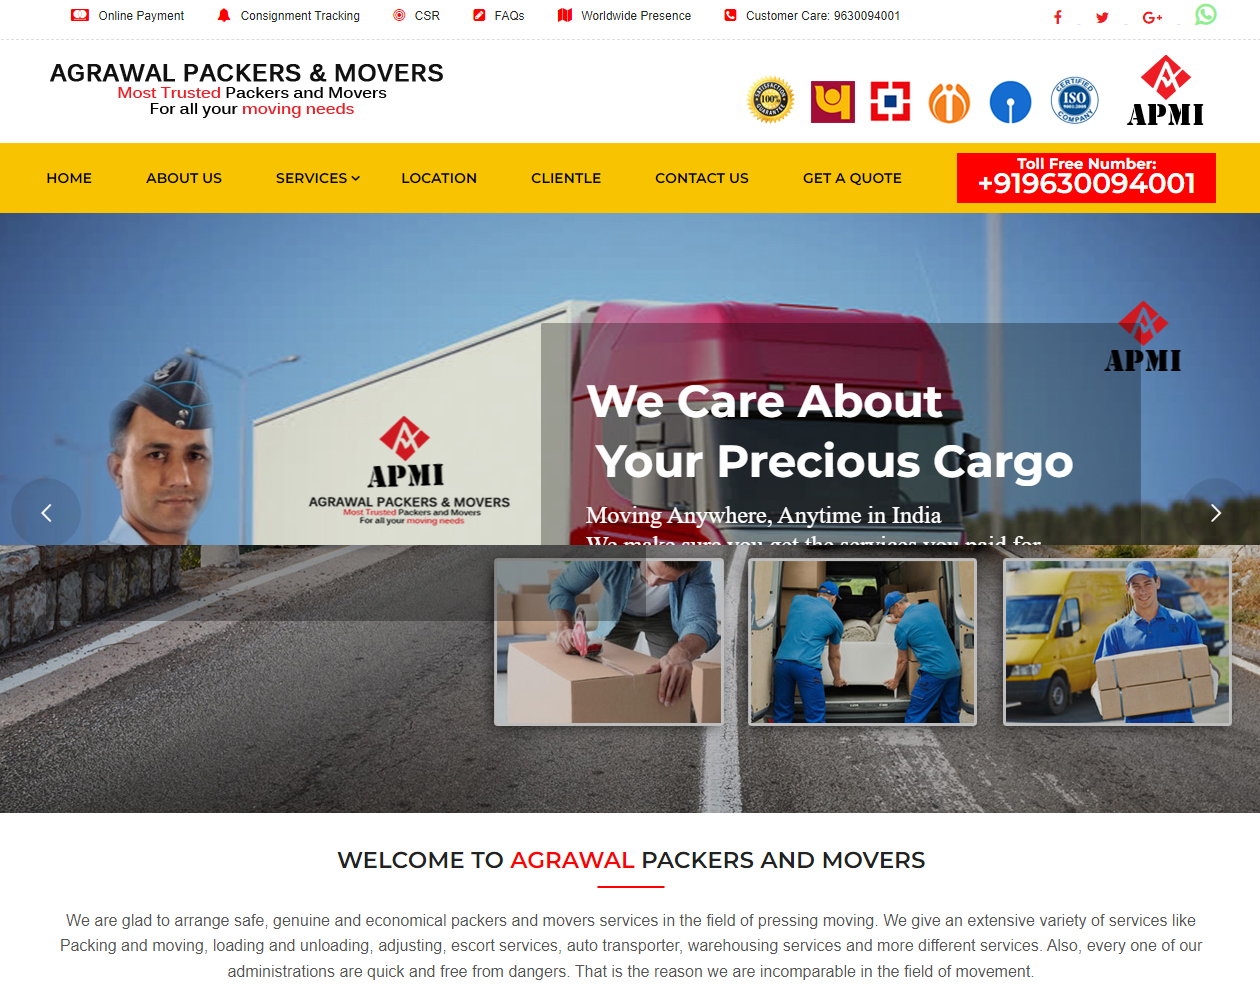 Agrawal Packers & Movers